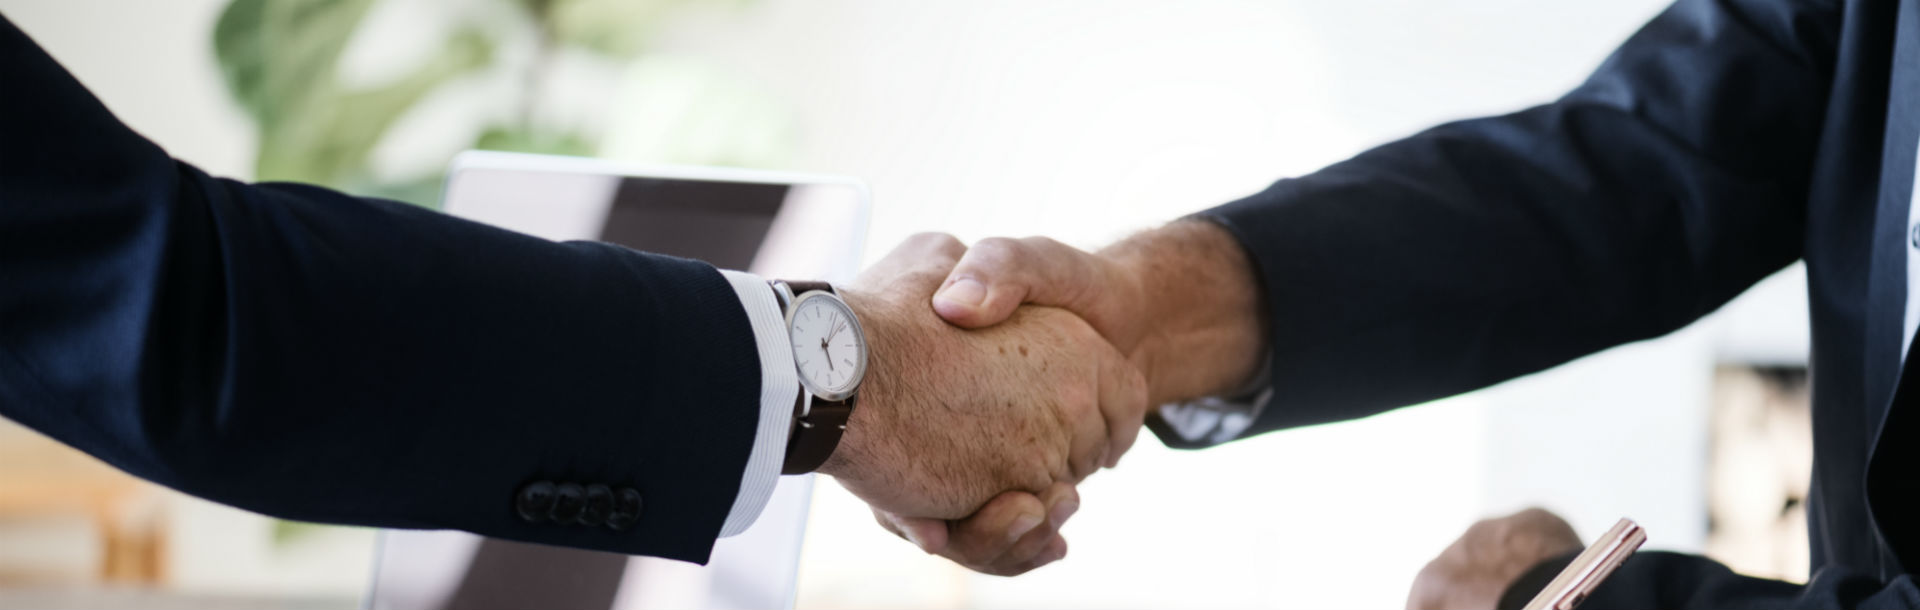 business people shaking hands